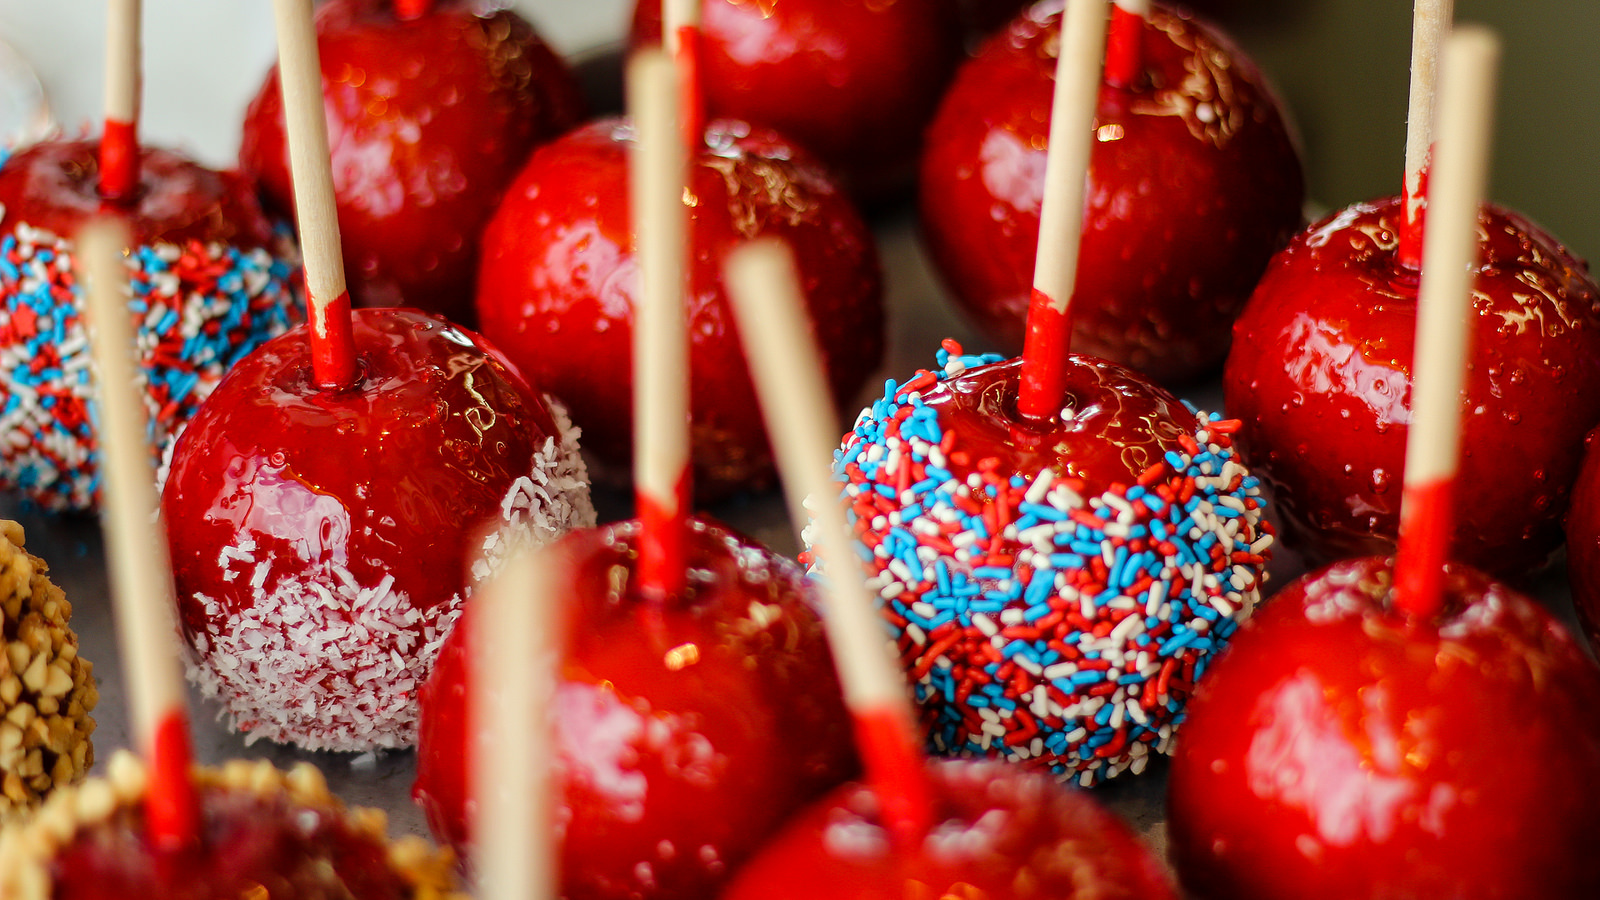 There's no shortage of summer food festivals in New England (or candied apples).